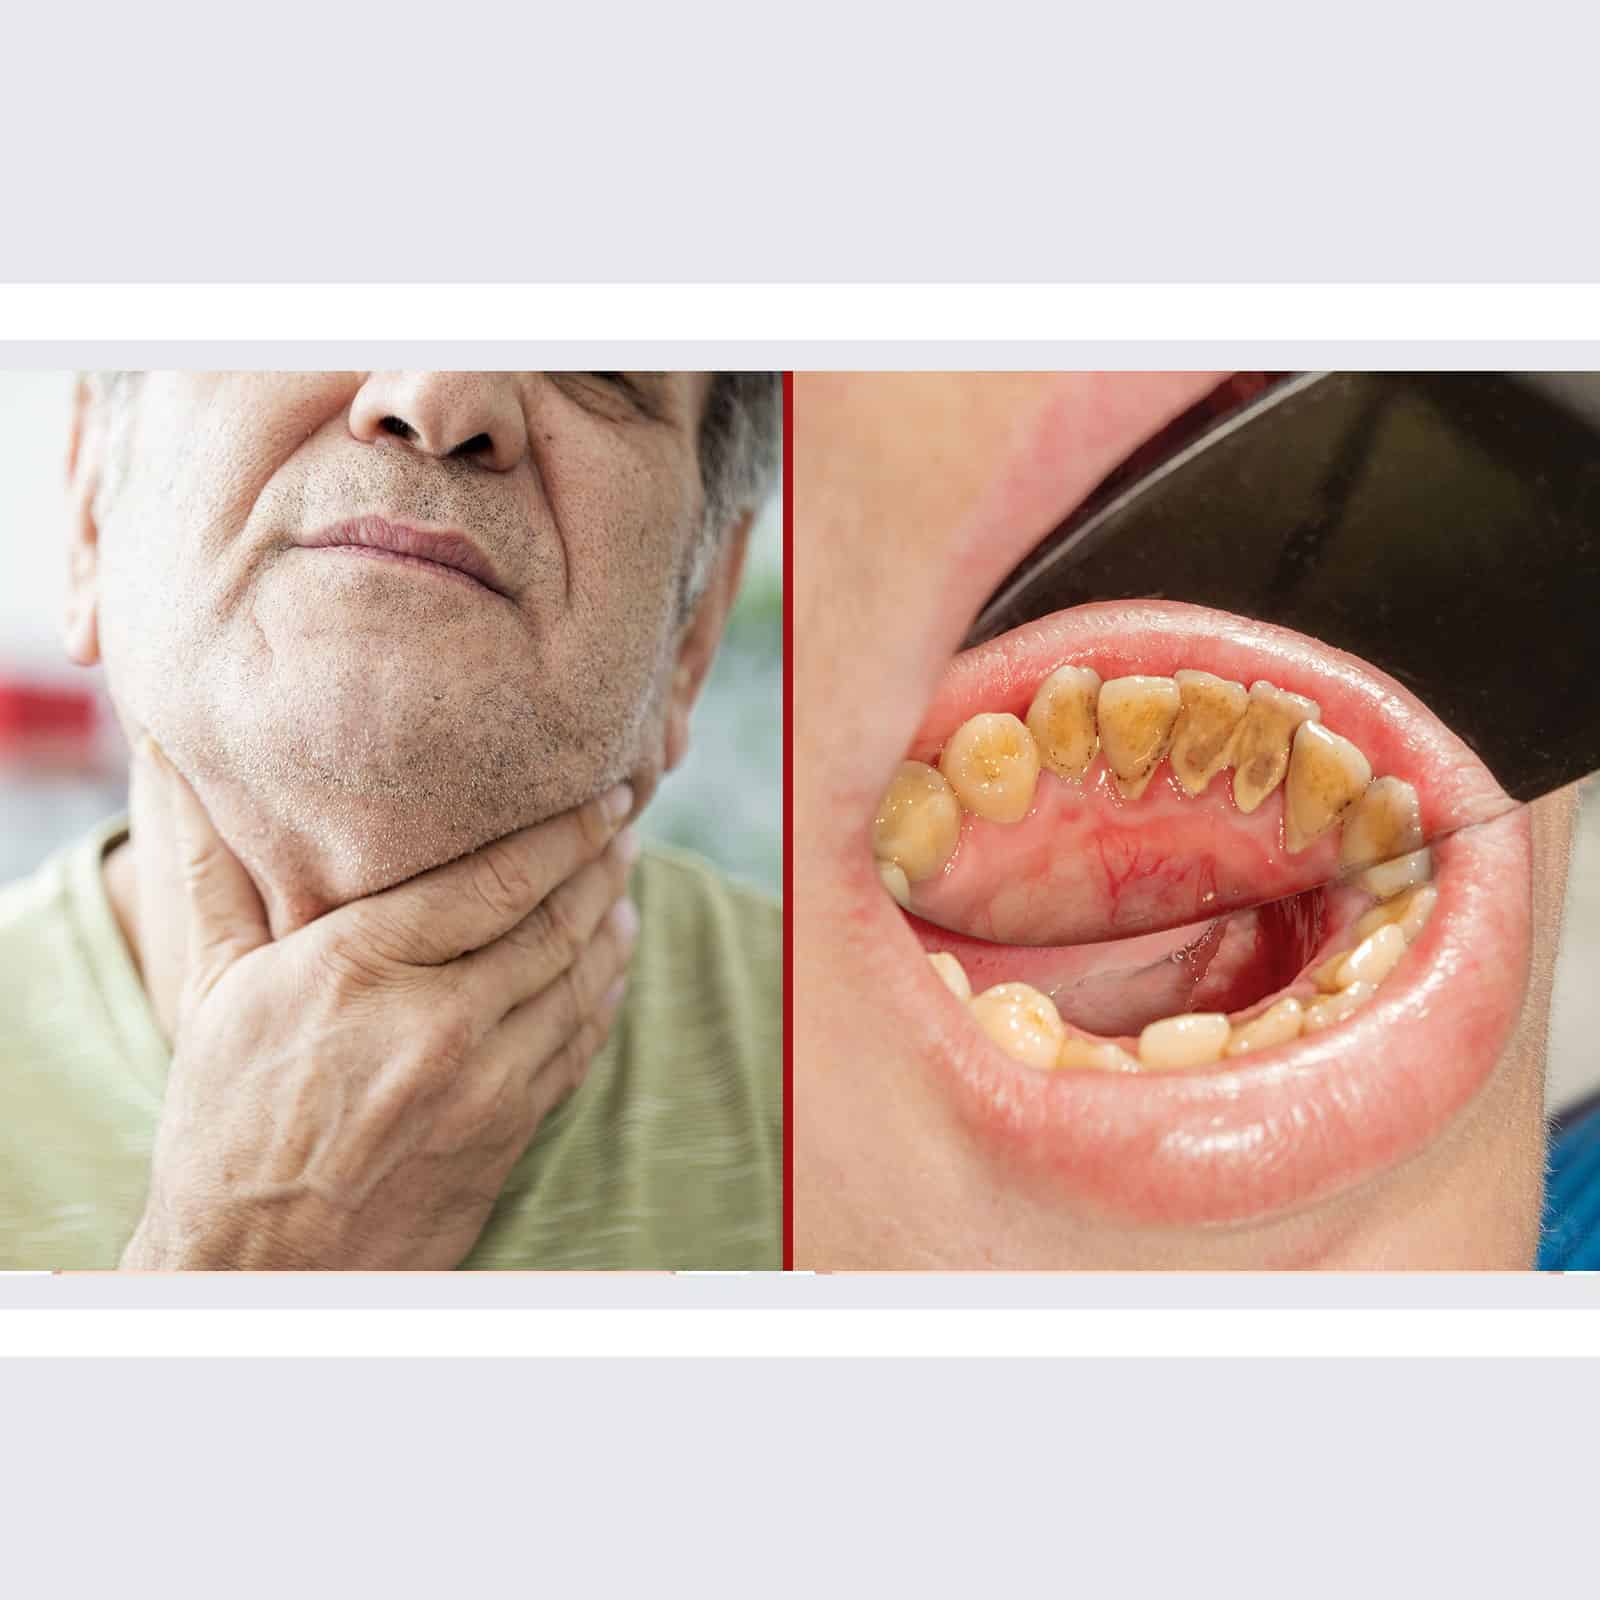 Oncologist Reveals the Causes and Early Signs of Oral Cancer